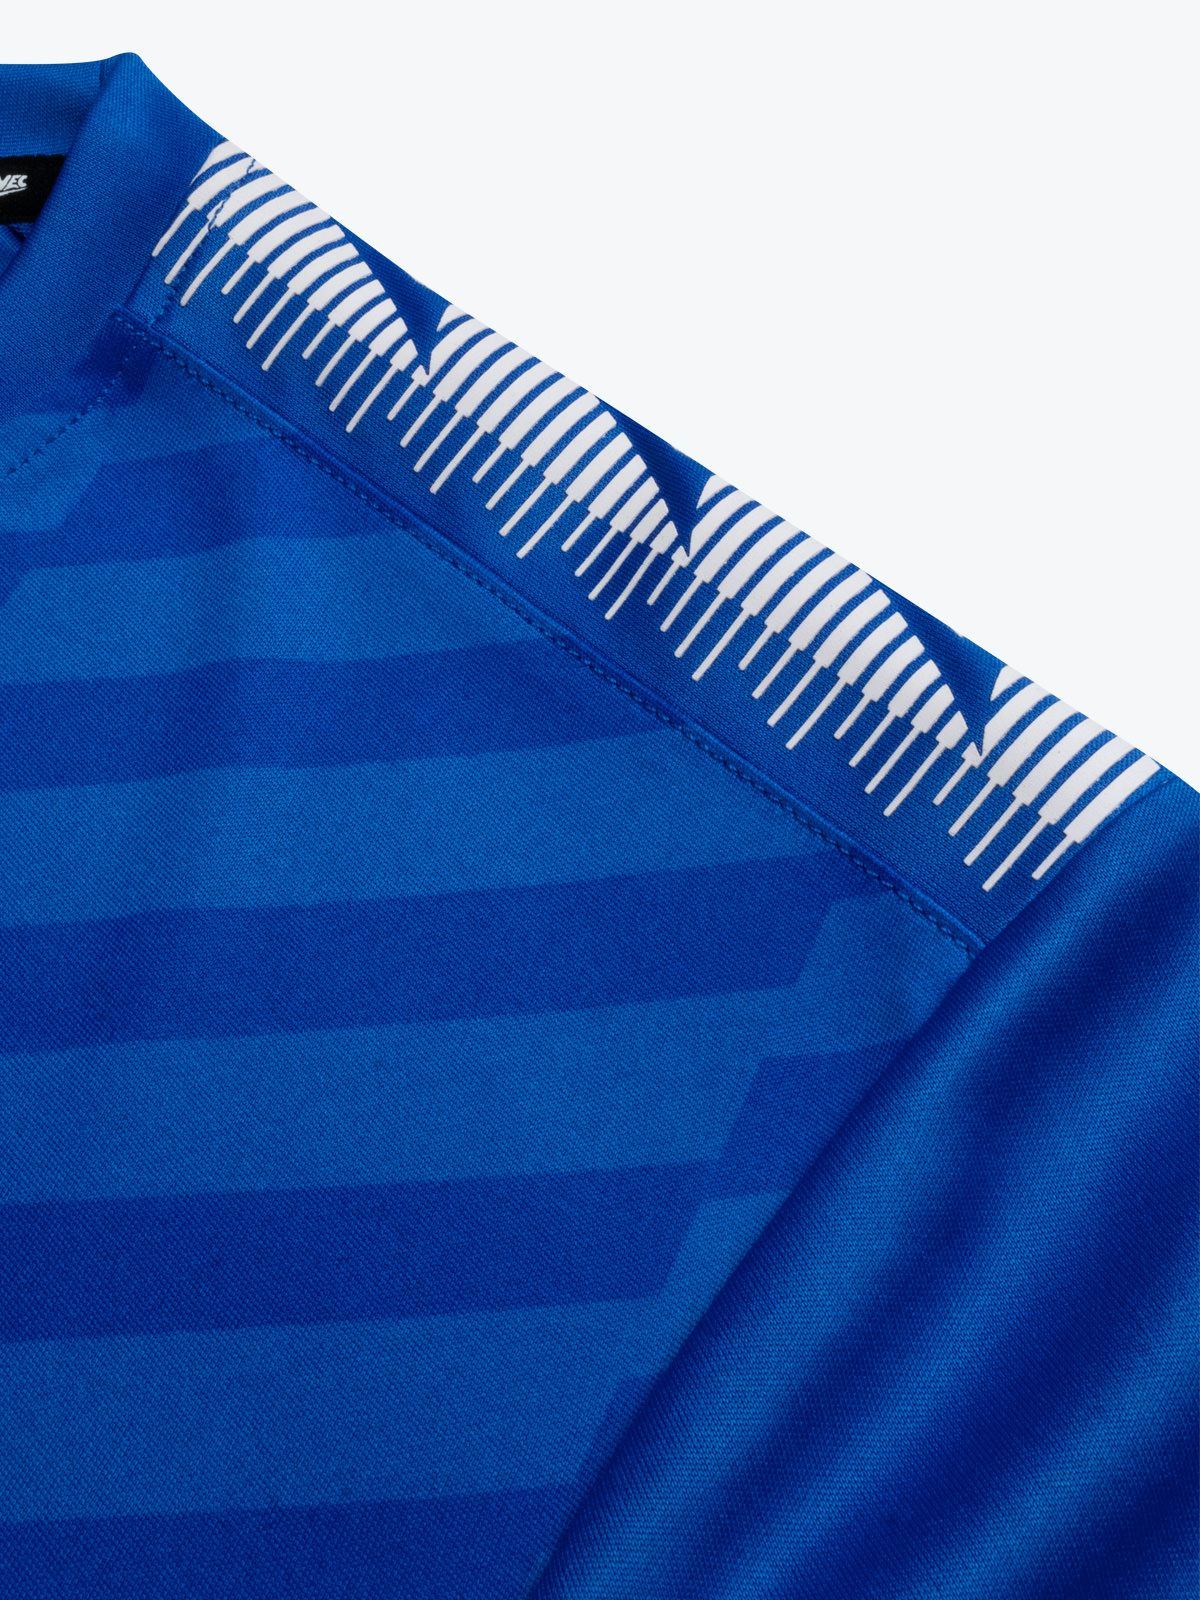 picture of evolve pro 3 jersey - royal